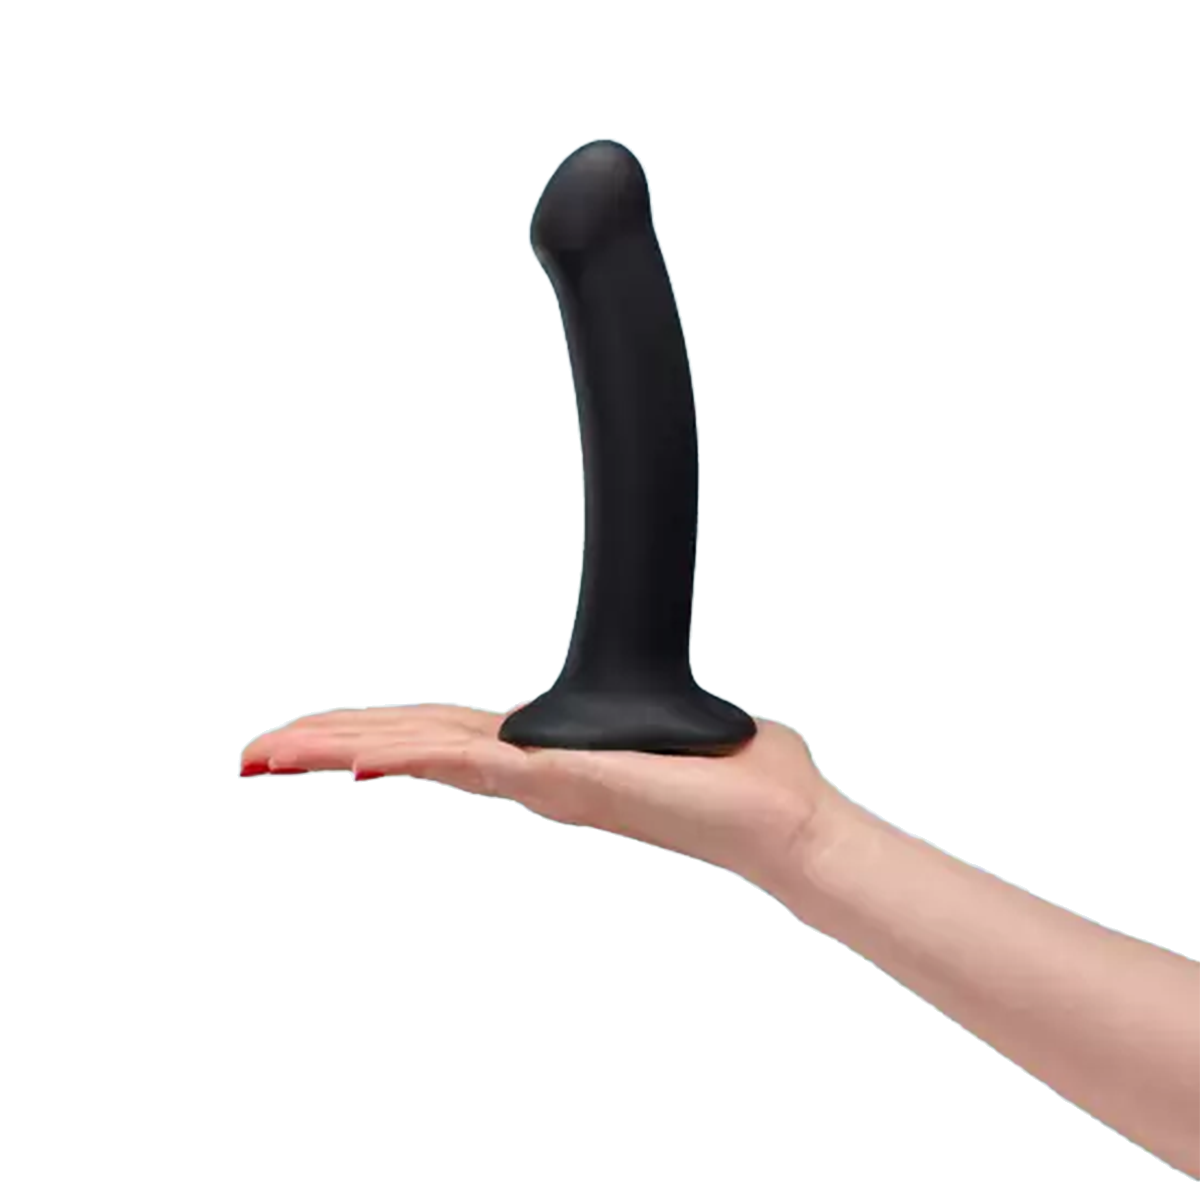 Magnum Silicone Dildo by Fun Factory